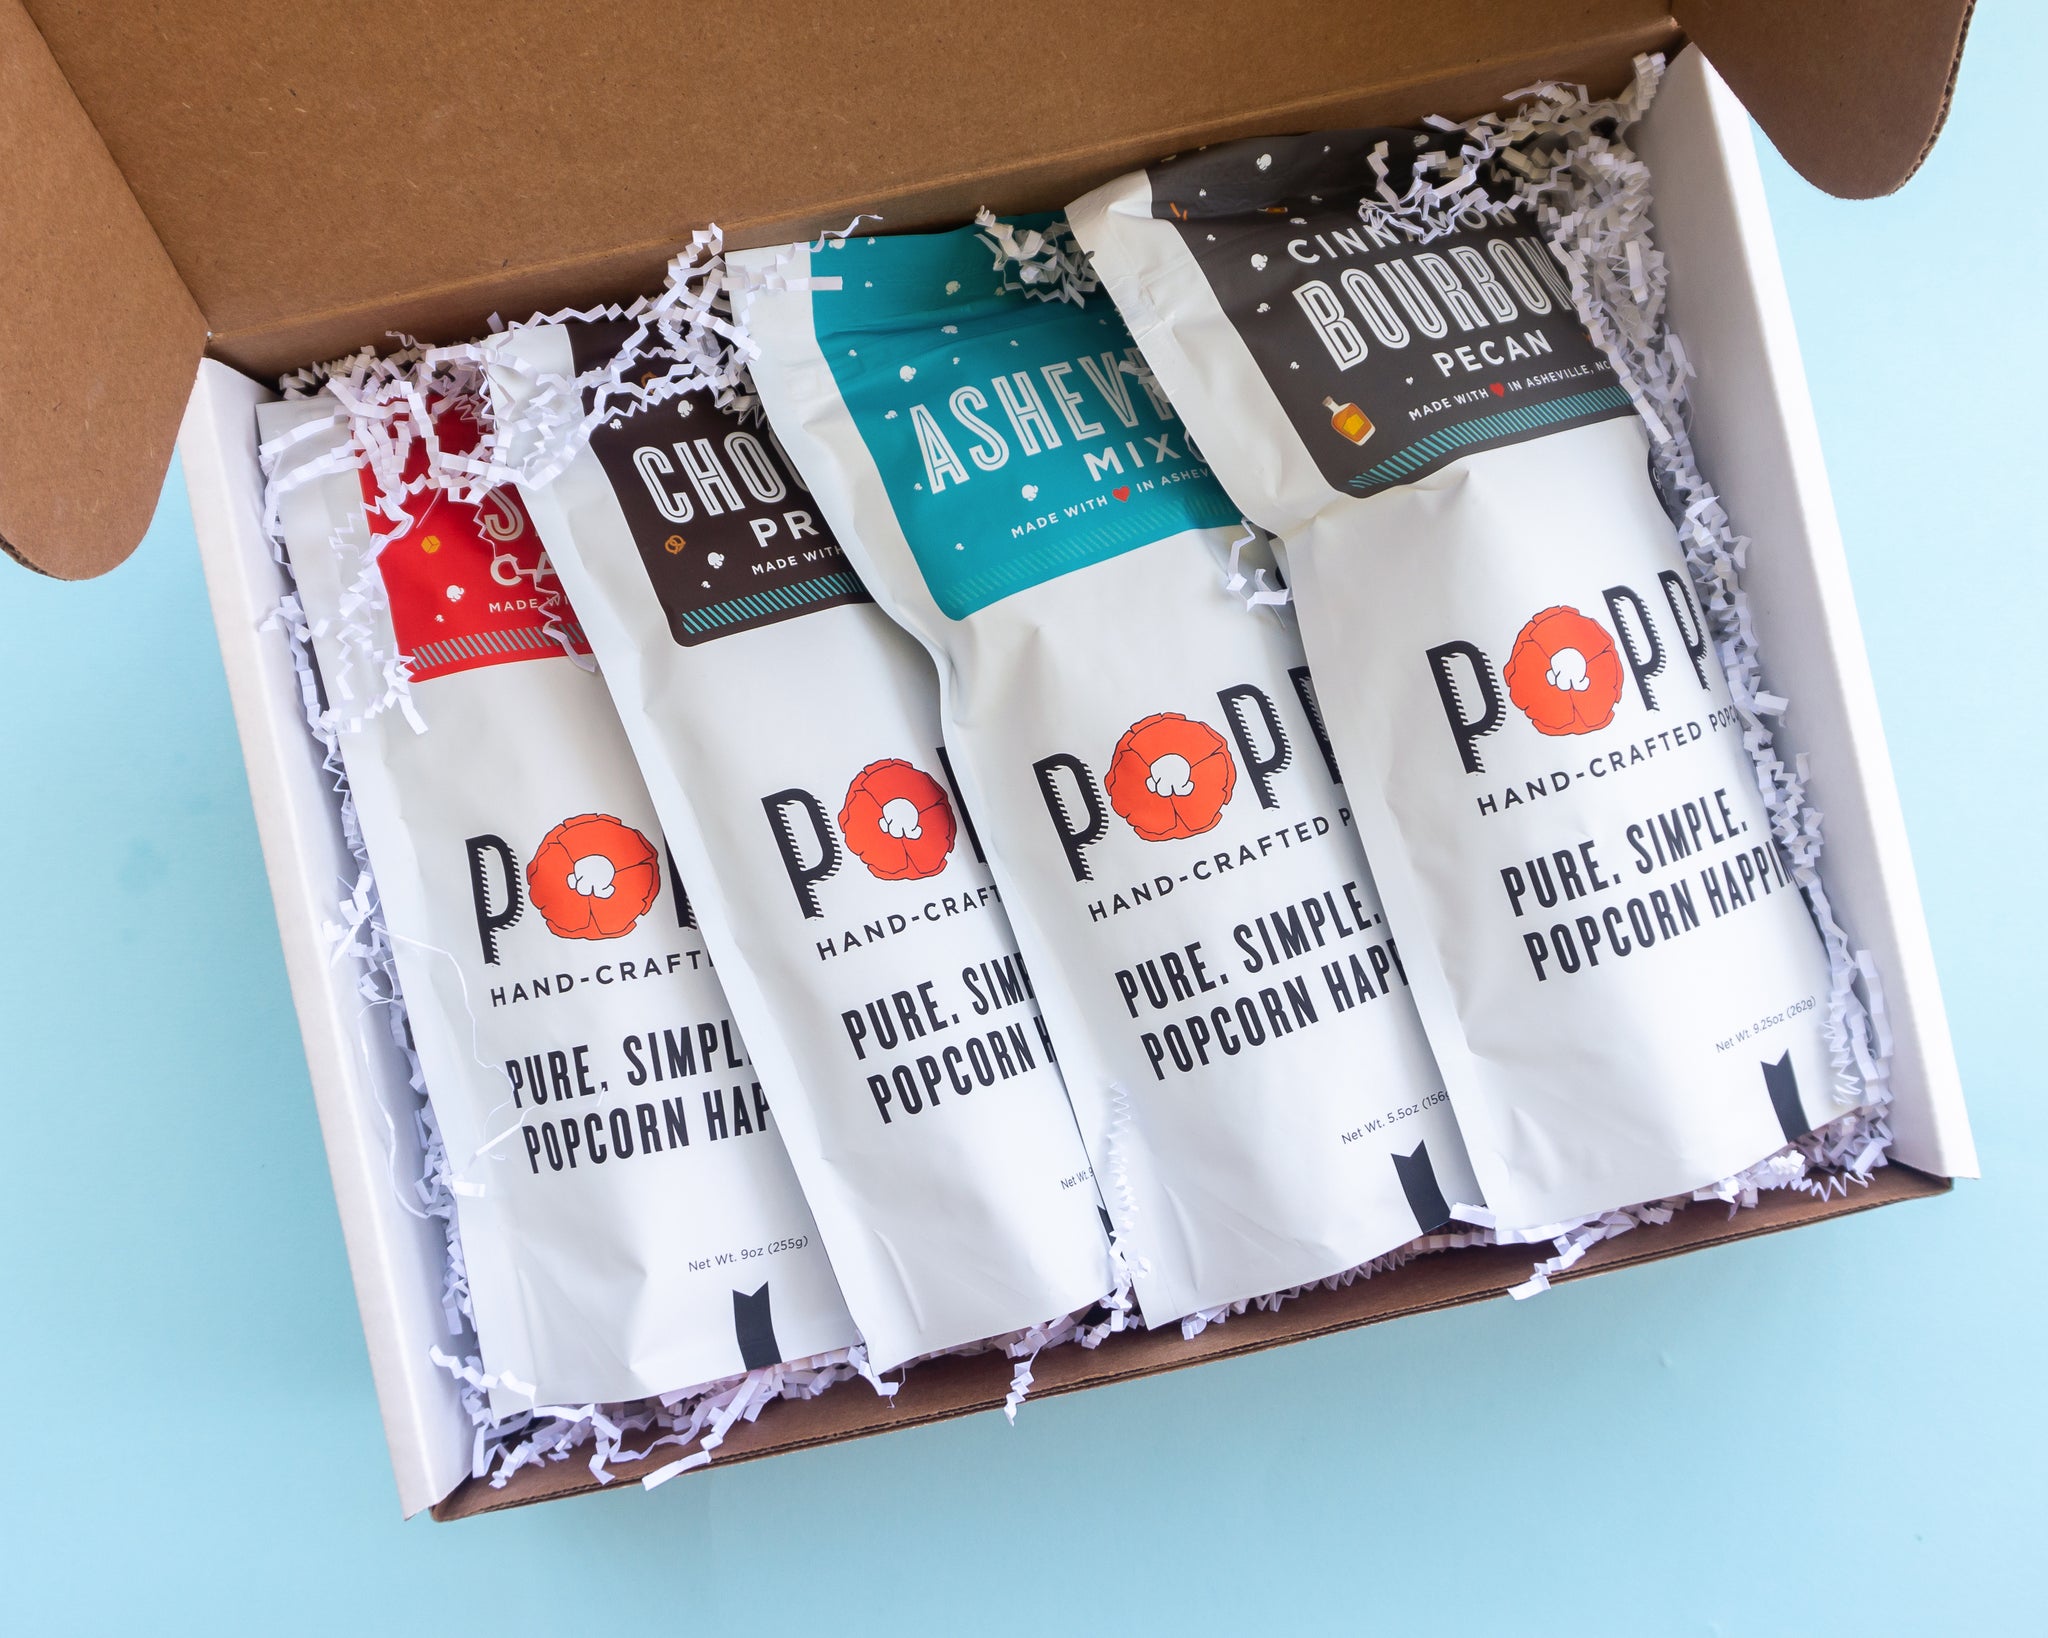 Sweet Tooth Package Handcrafted Popcorn - Little Owly